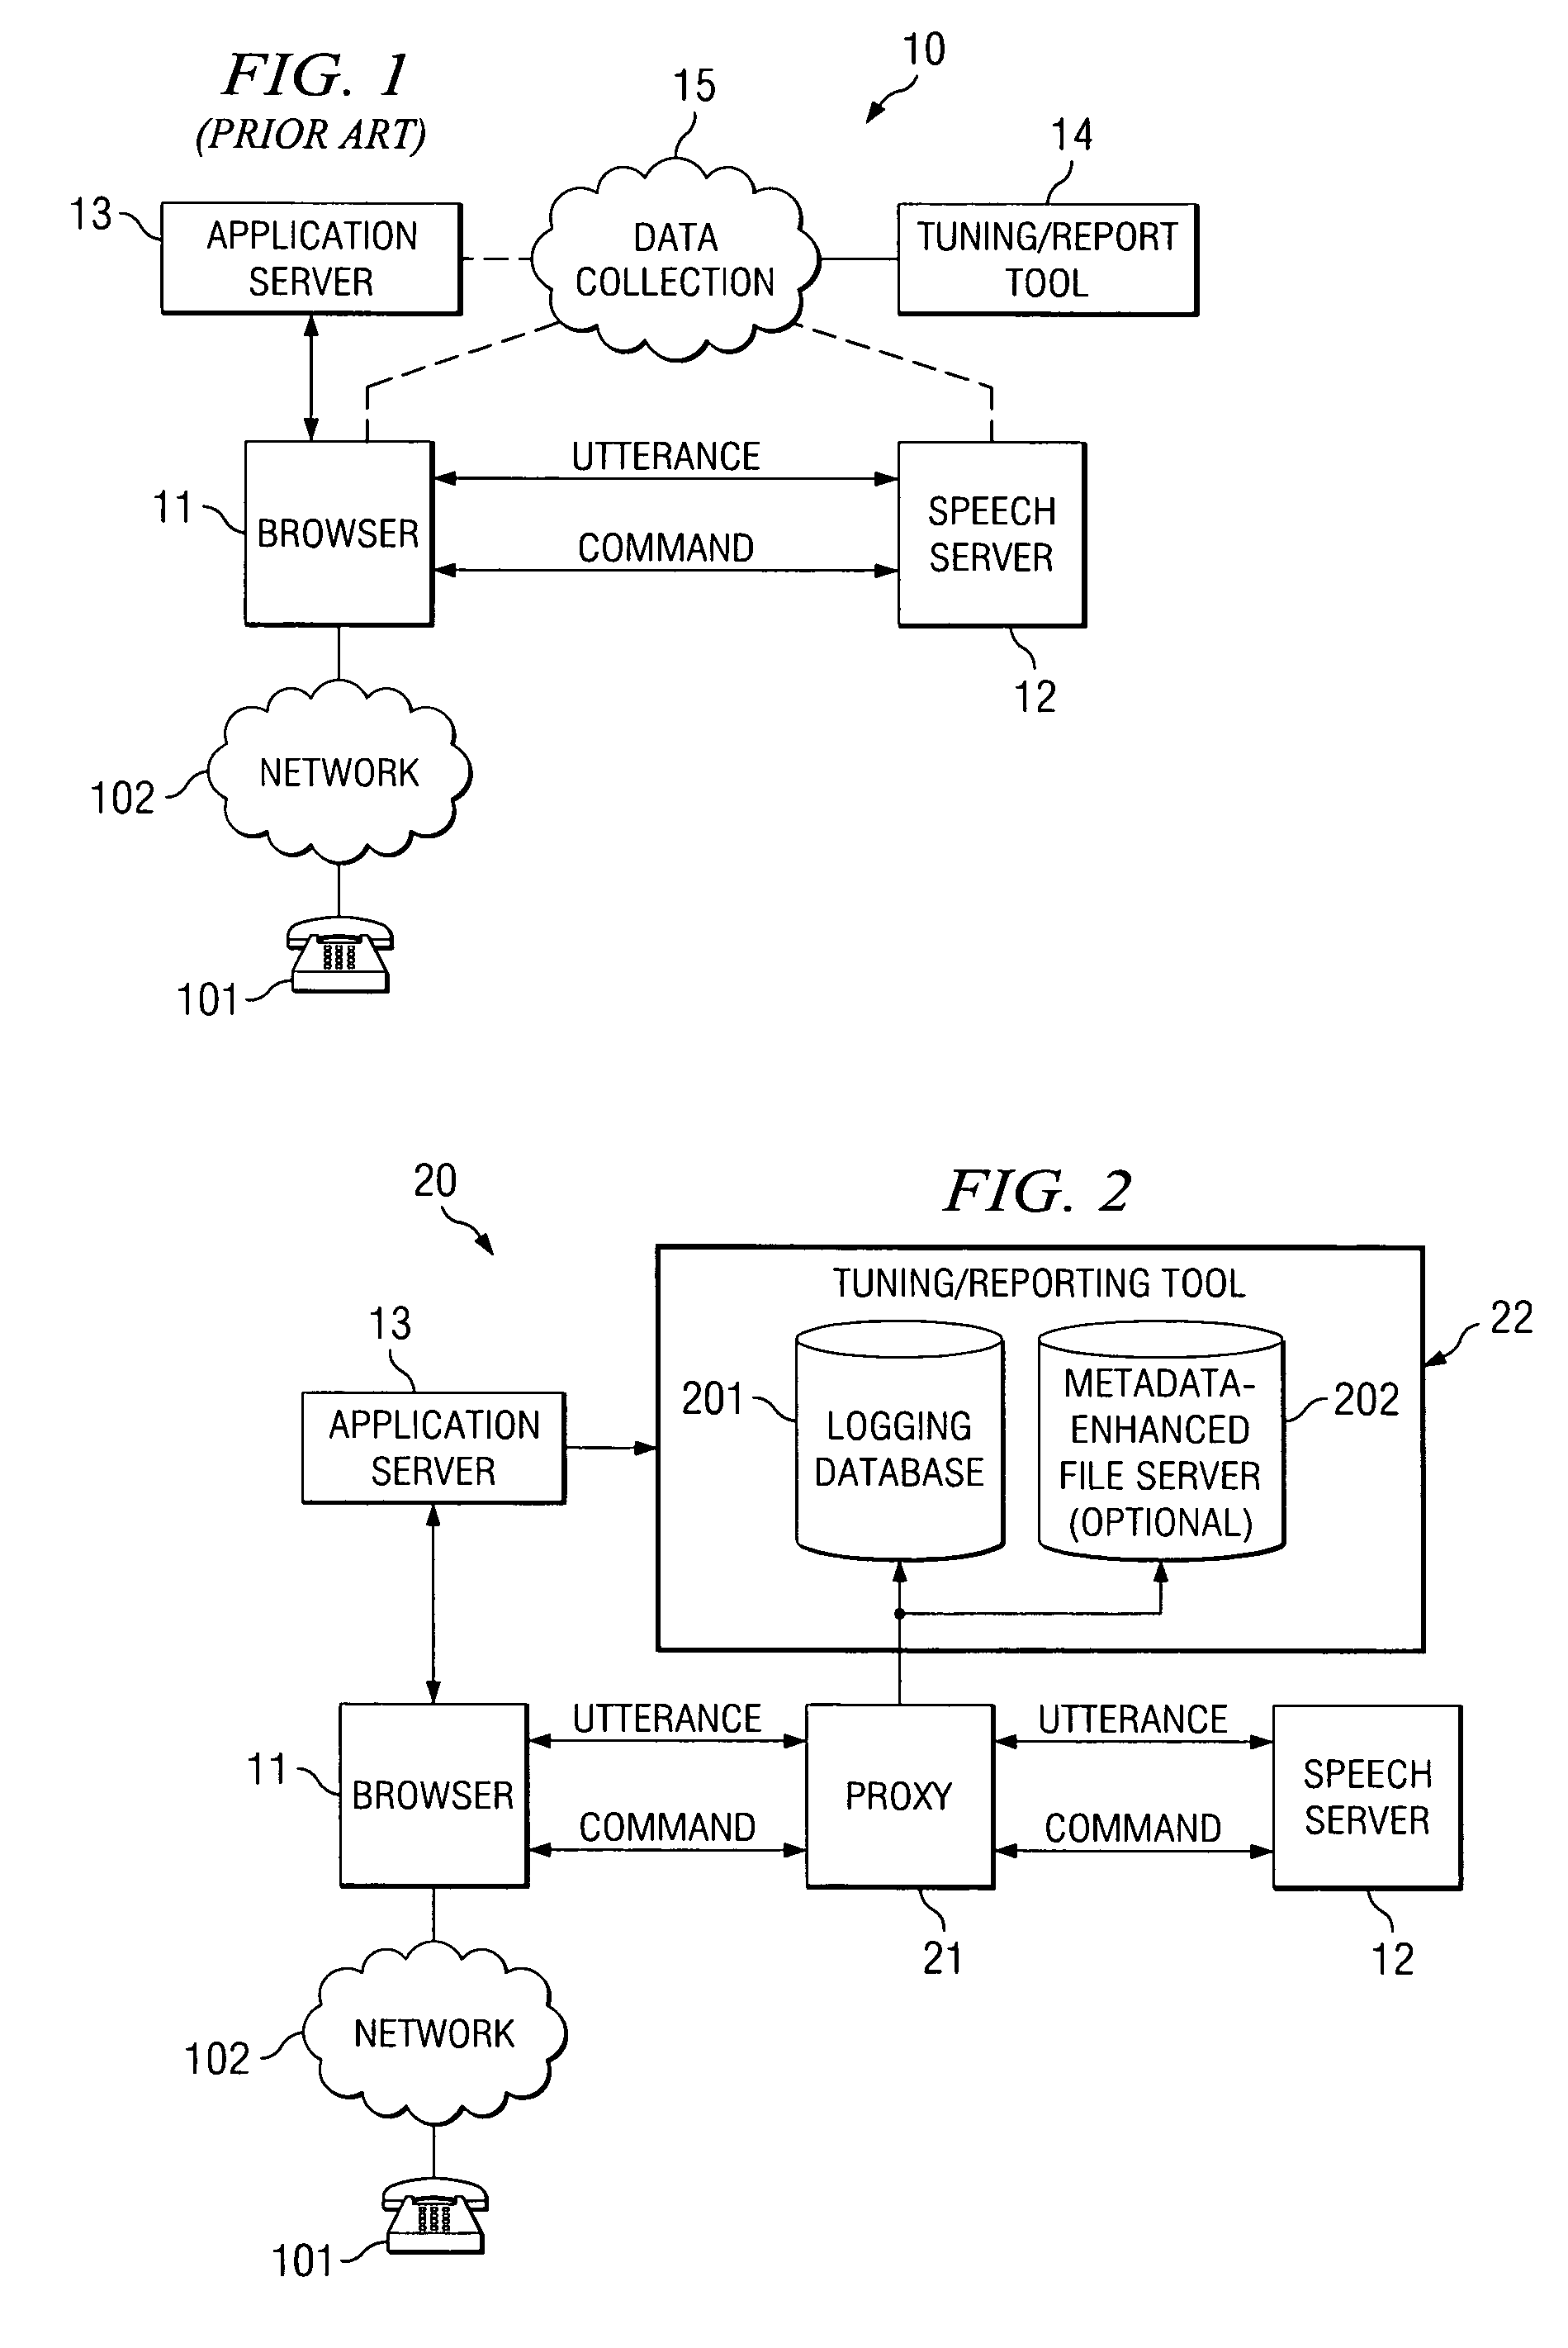 System and method for providing transcription services using a speech server in an interactive voice response system